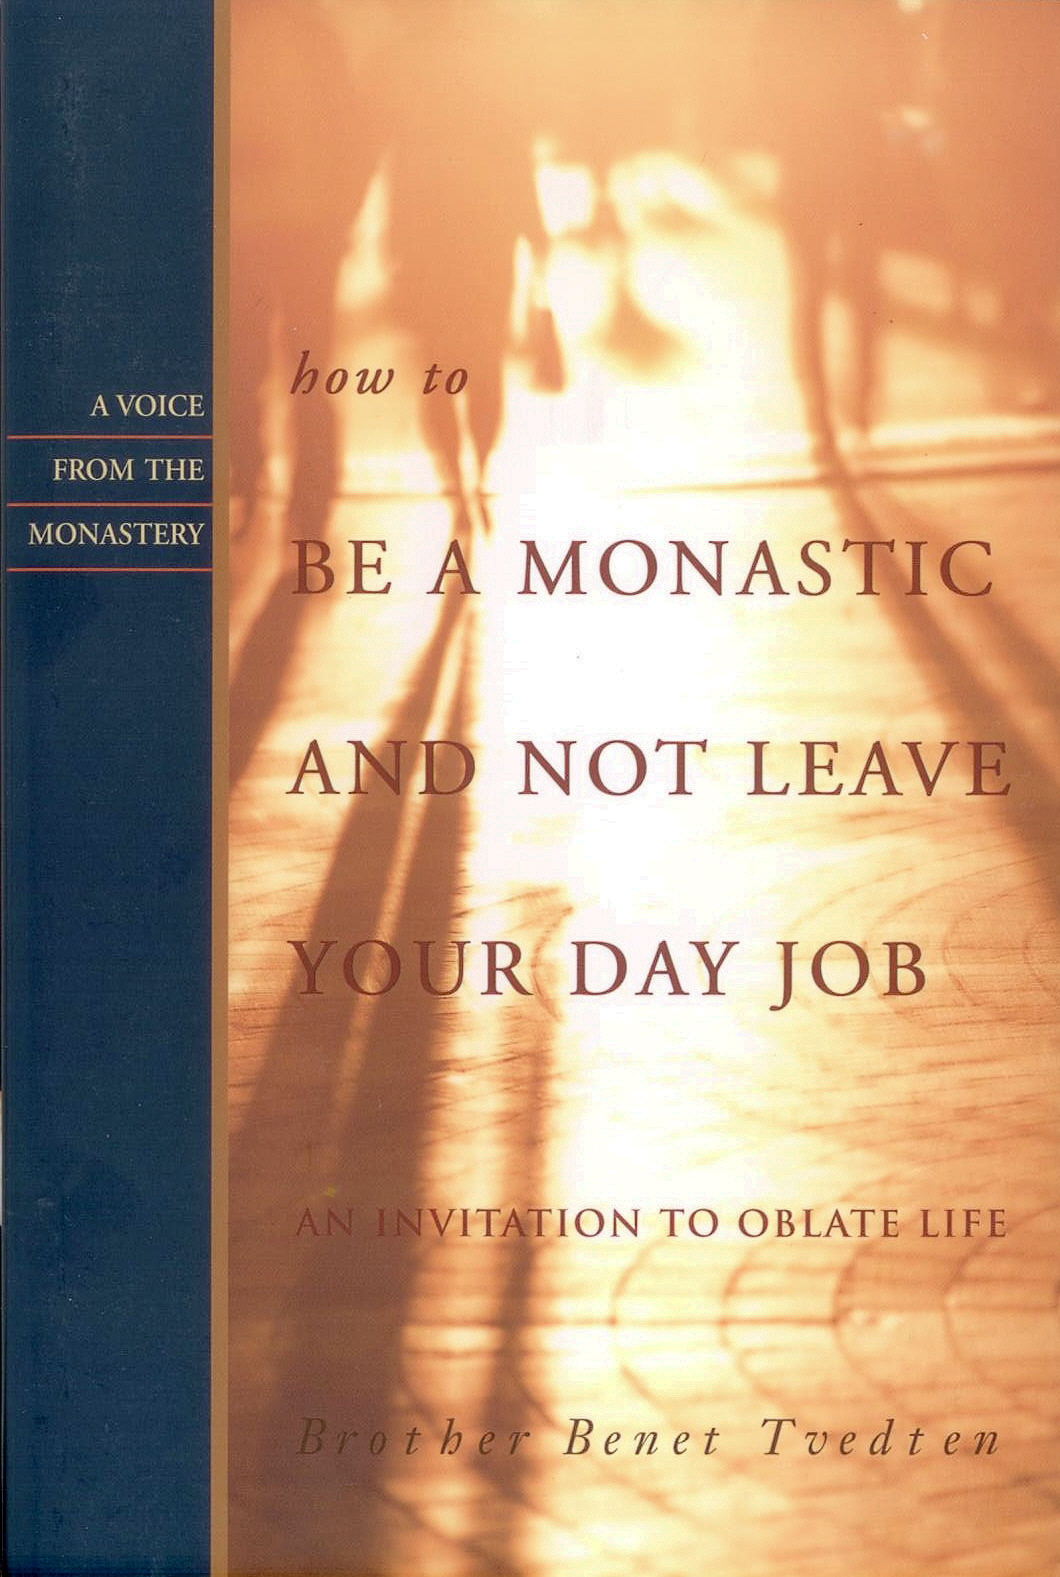 How To Be A Monastic And Not Leave Your Day Job